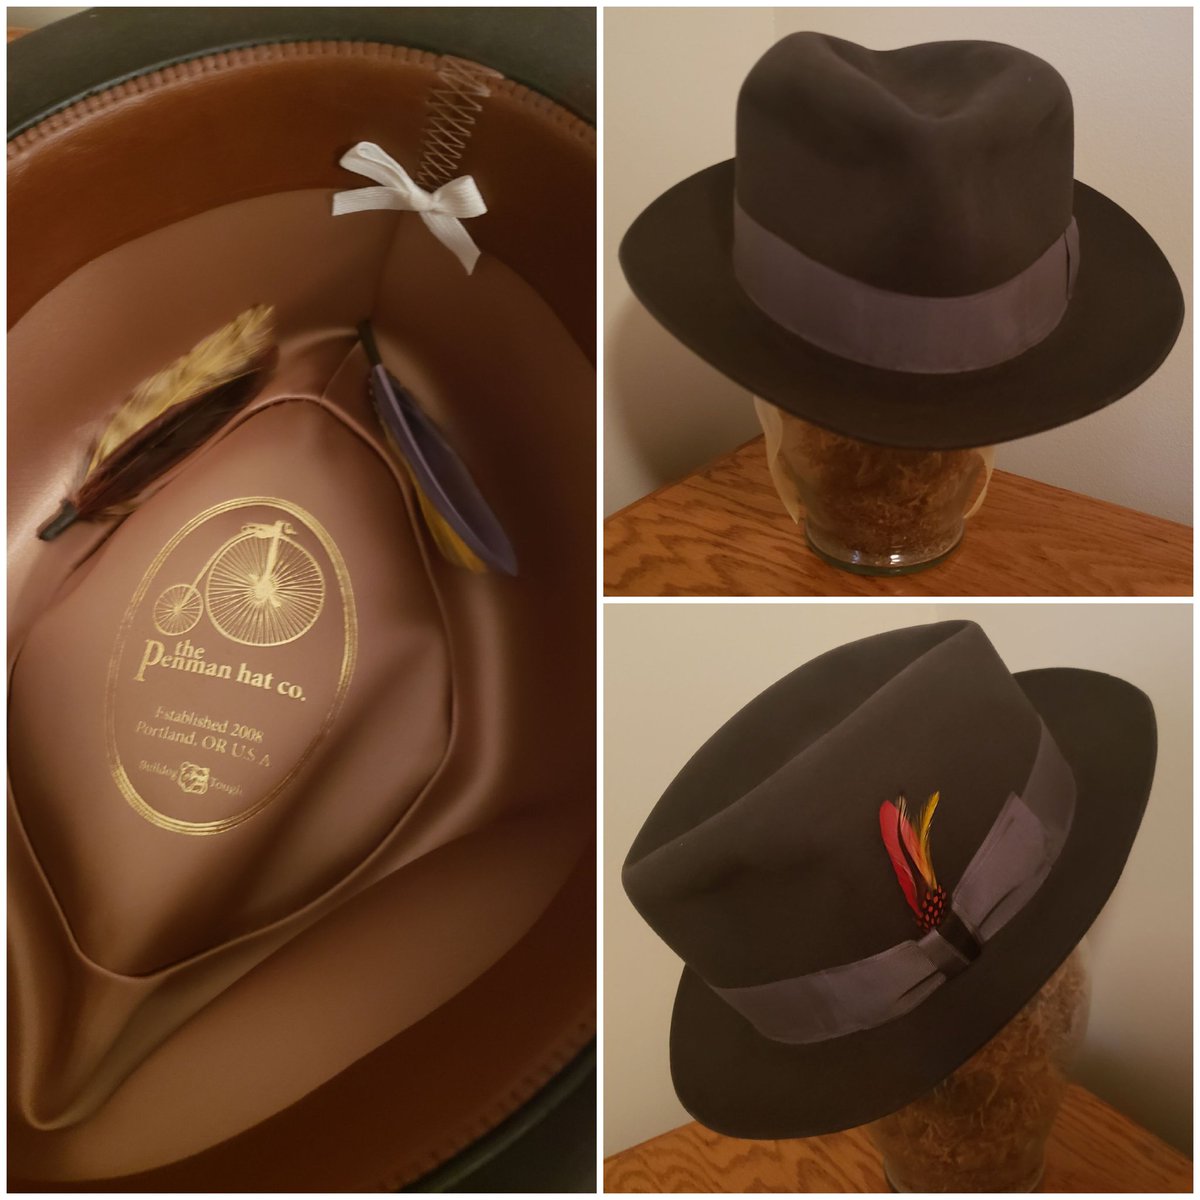 It's here and it's beautiful!! 😍 An original, one of a kind, custom-made to fit @Penmanhats !! Thank you, John! You've outdone yourself!! 🙌 Now to get it onto the head of the ever elusive @RikRankin!  🤔
🏁🏁🏁🏁🏁🏁🏁🏁🏁🏁🏁🏁
@PinkieSwearProd @ElaineMilo2